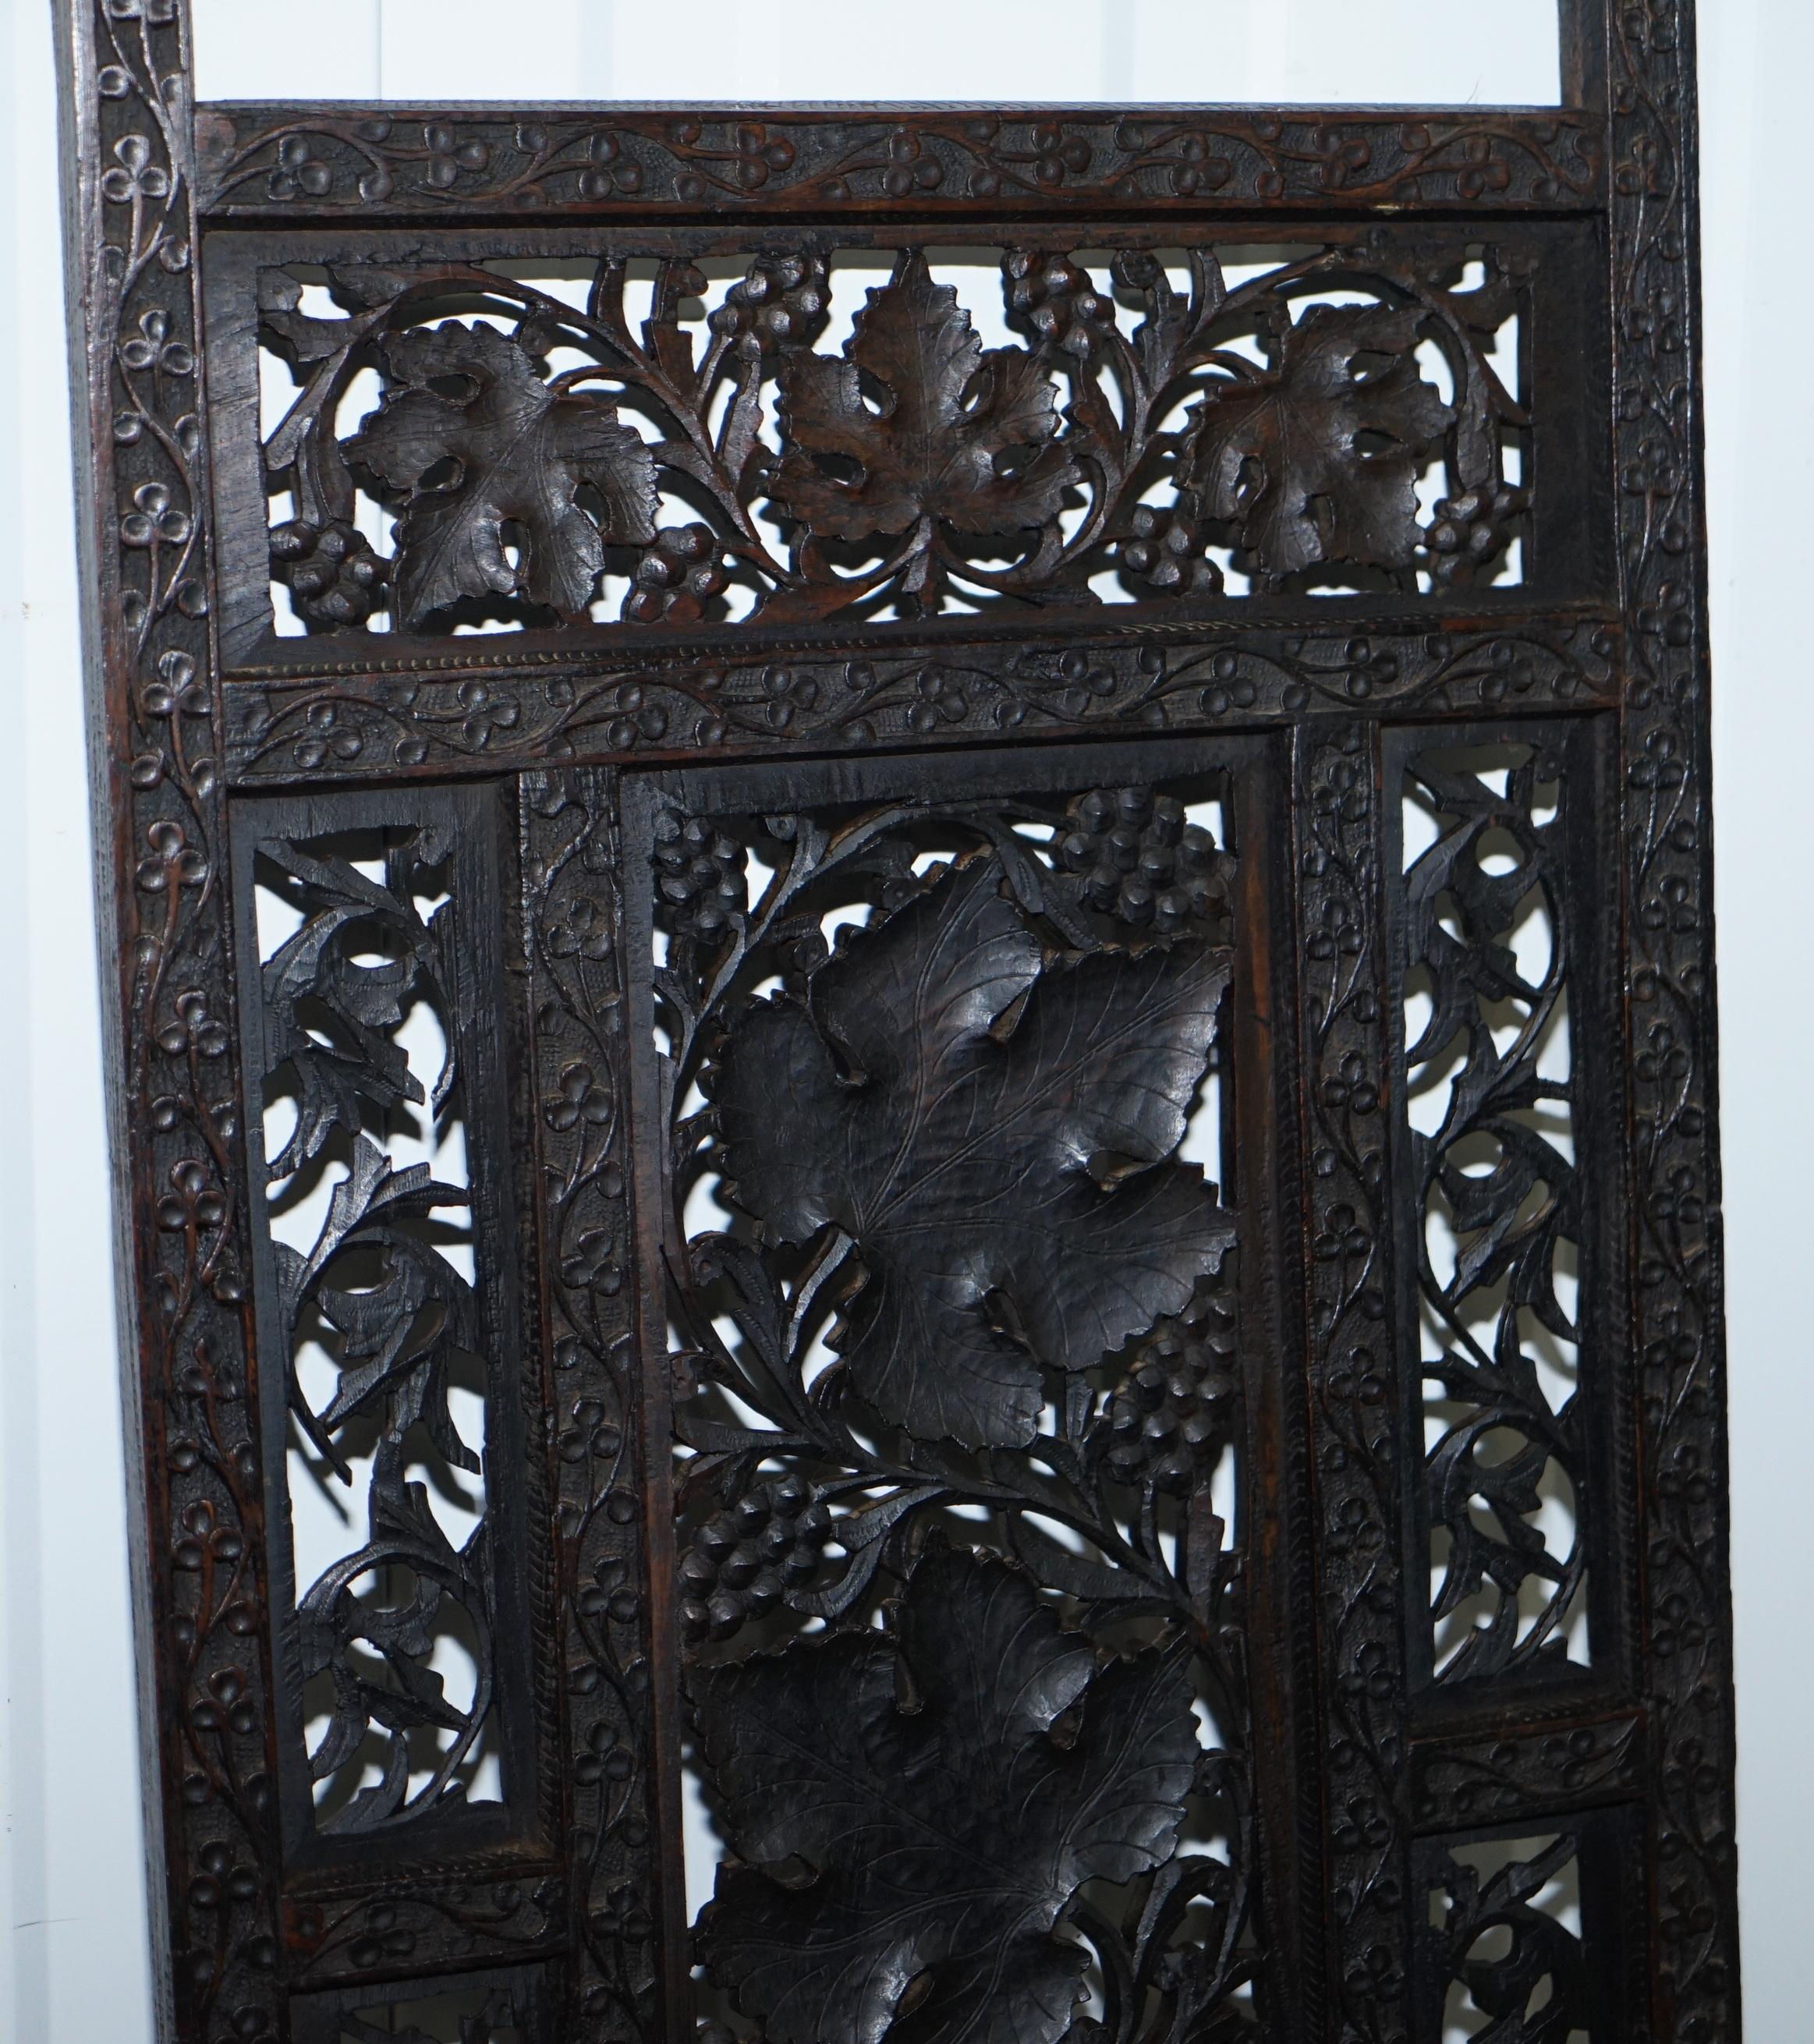 Rare Chinese Fretwork Carved Wall Panels Depicting Leaves Solid Teak Art Wood 3